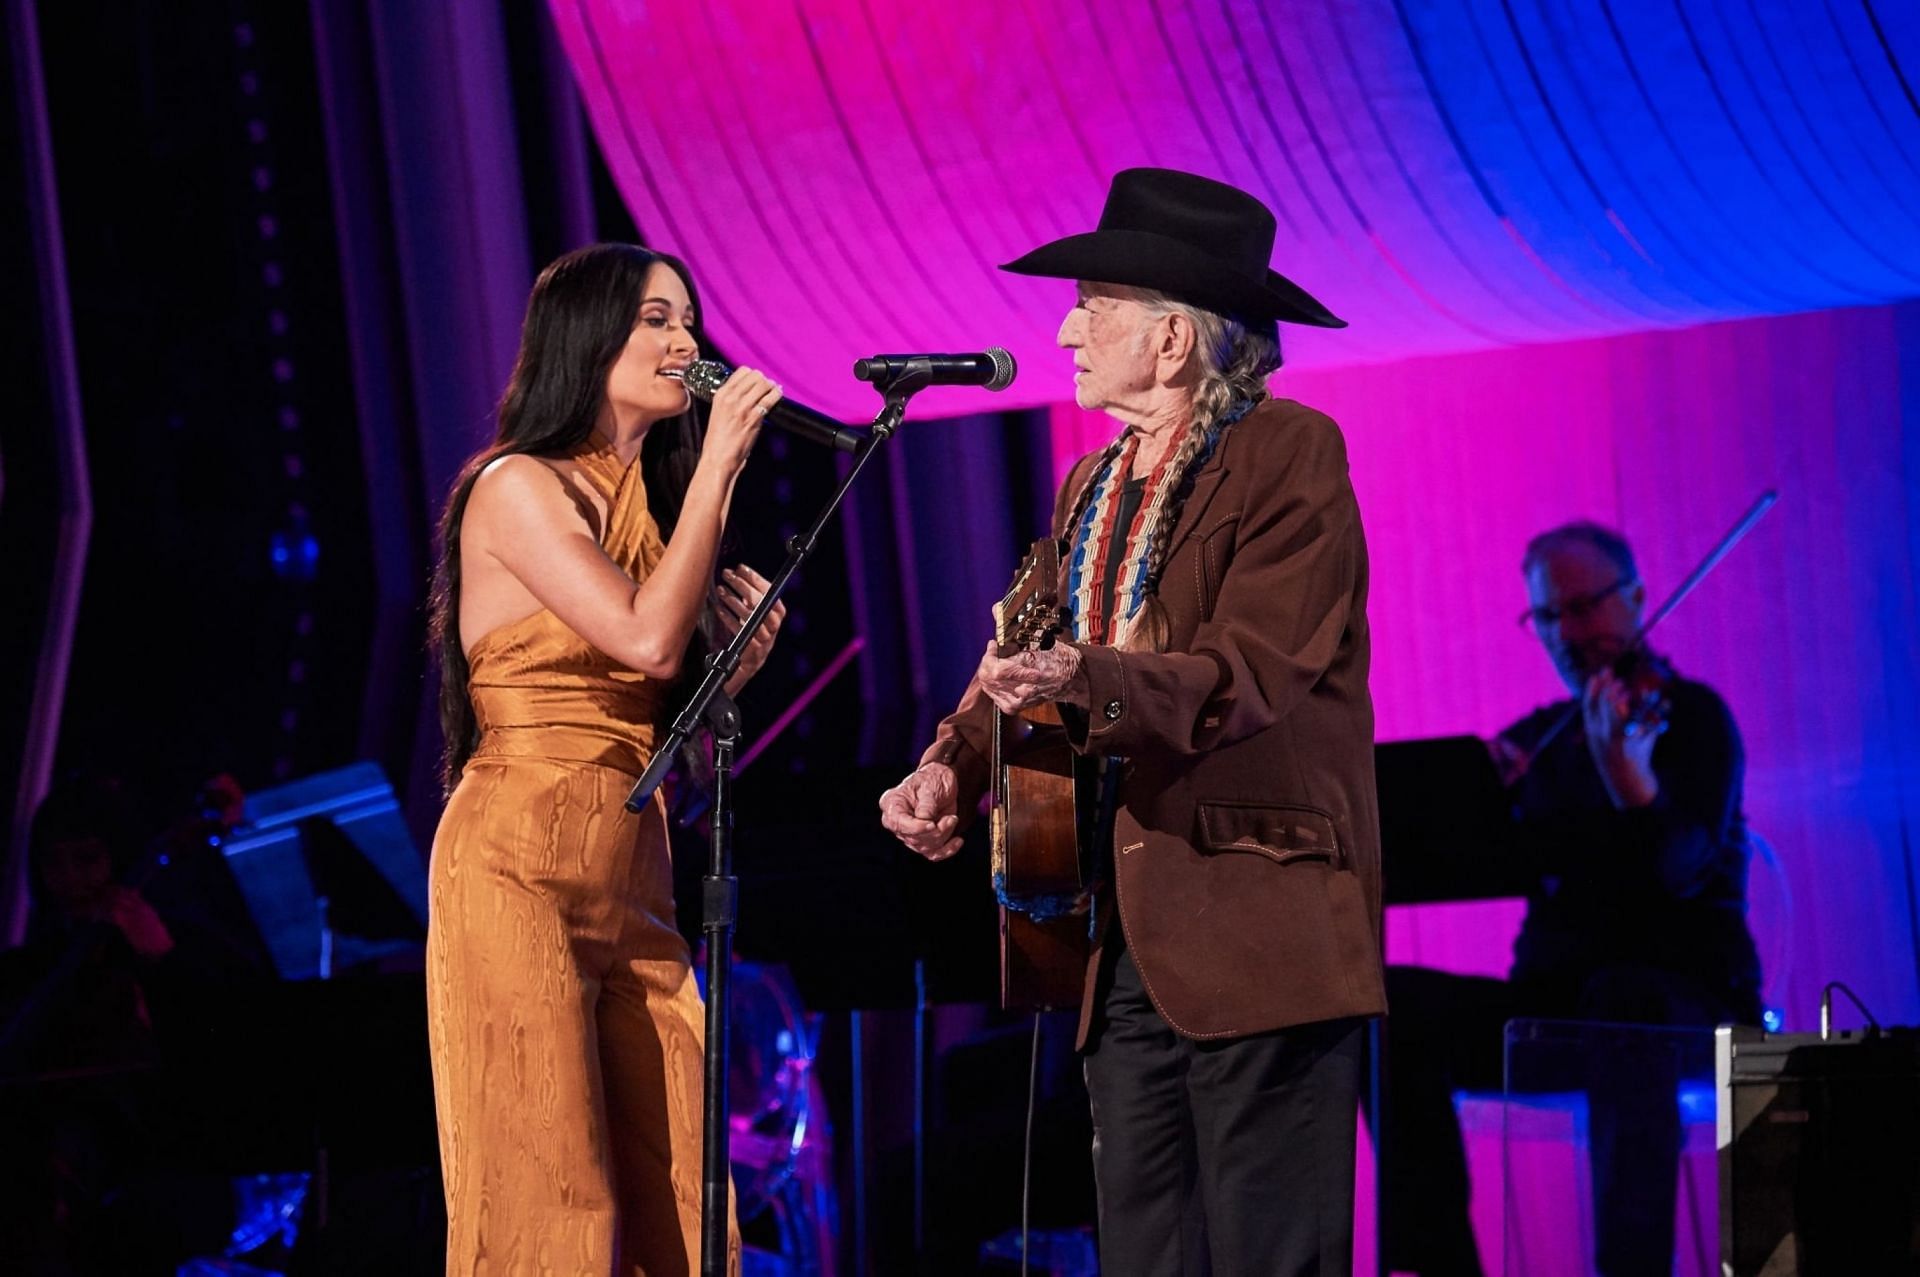 Willie Nelson, the headliner of Outlaw Music Festival 2023, at the 53rd CMA awards in 2019 with Kacey Musgraves(Image via Getty Images)